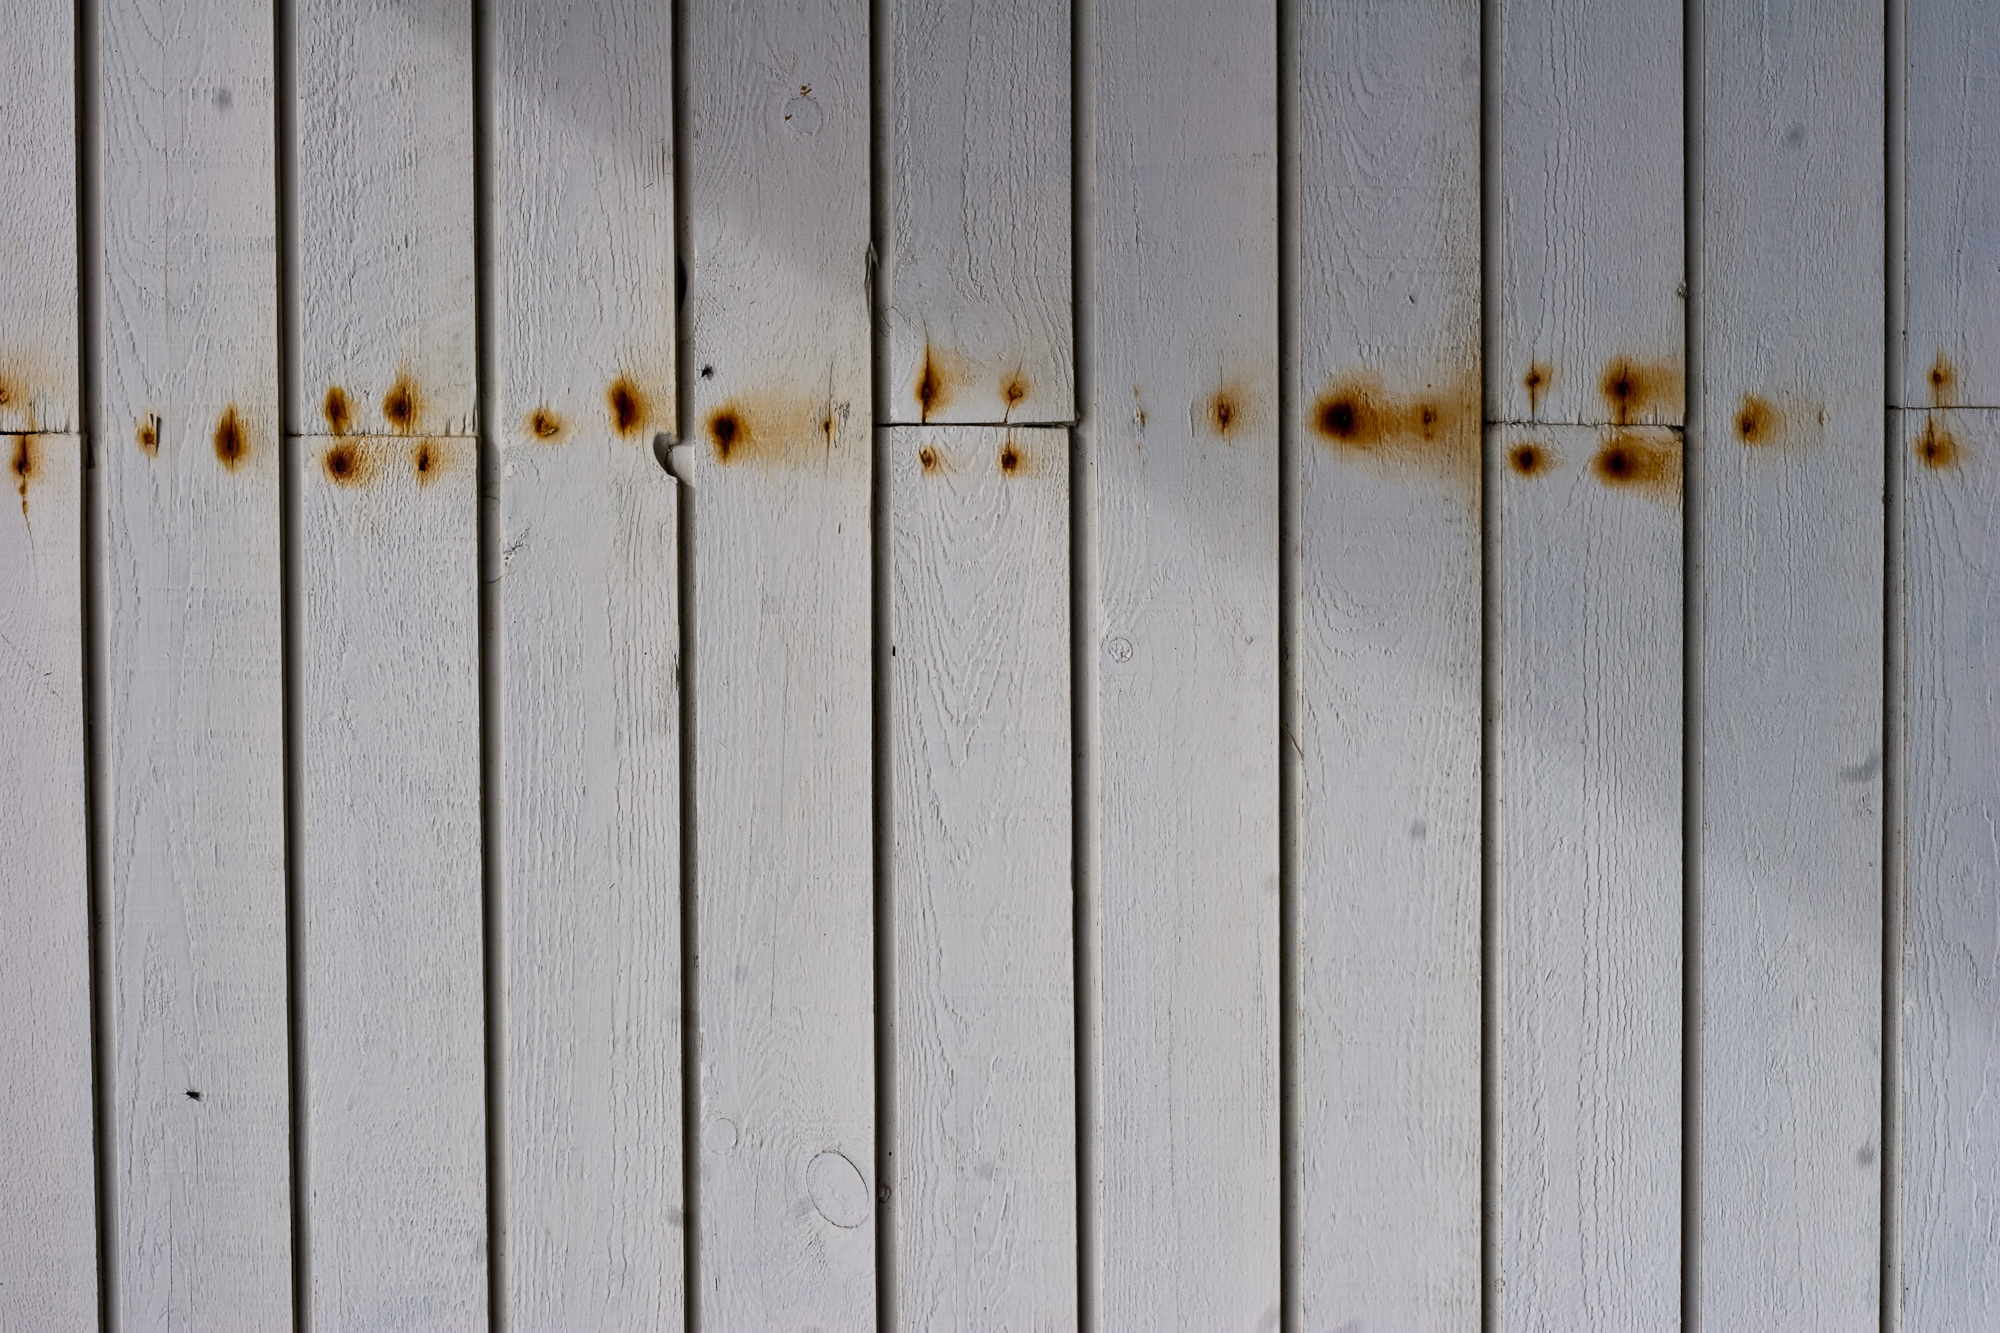 Rusted nails in wood photo